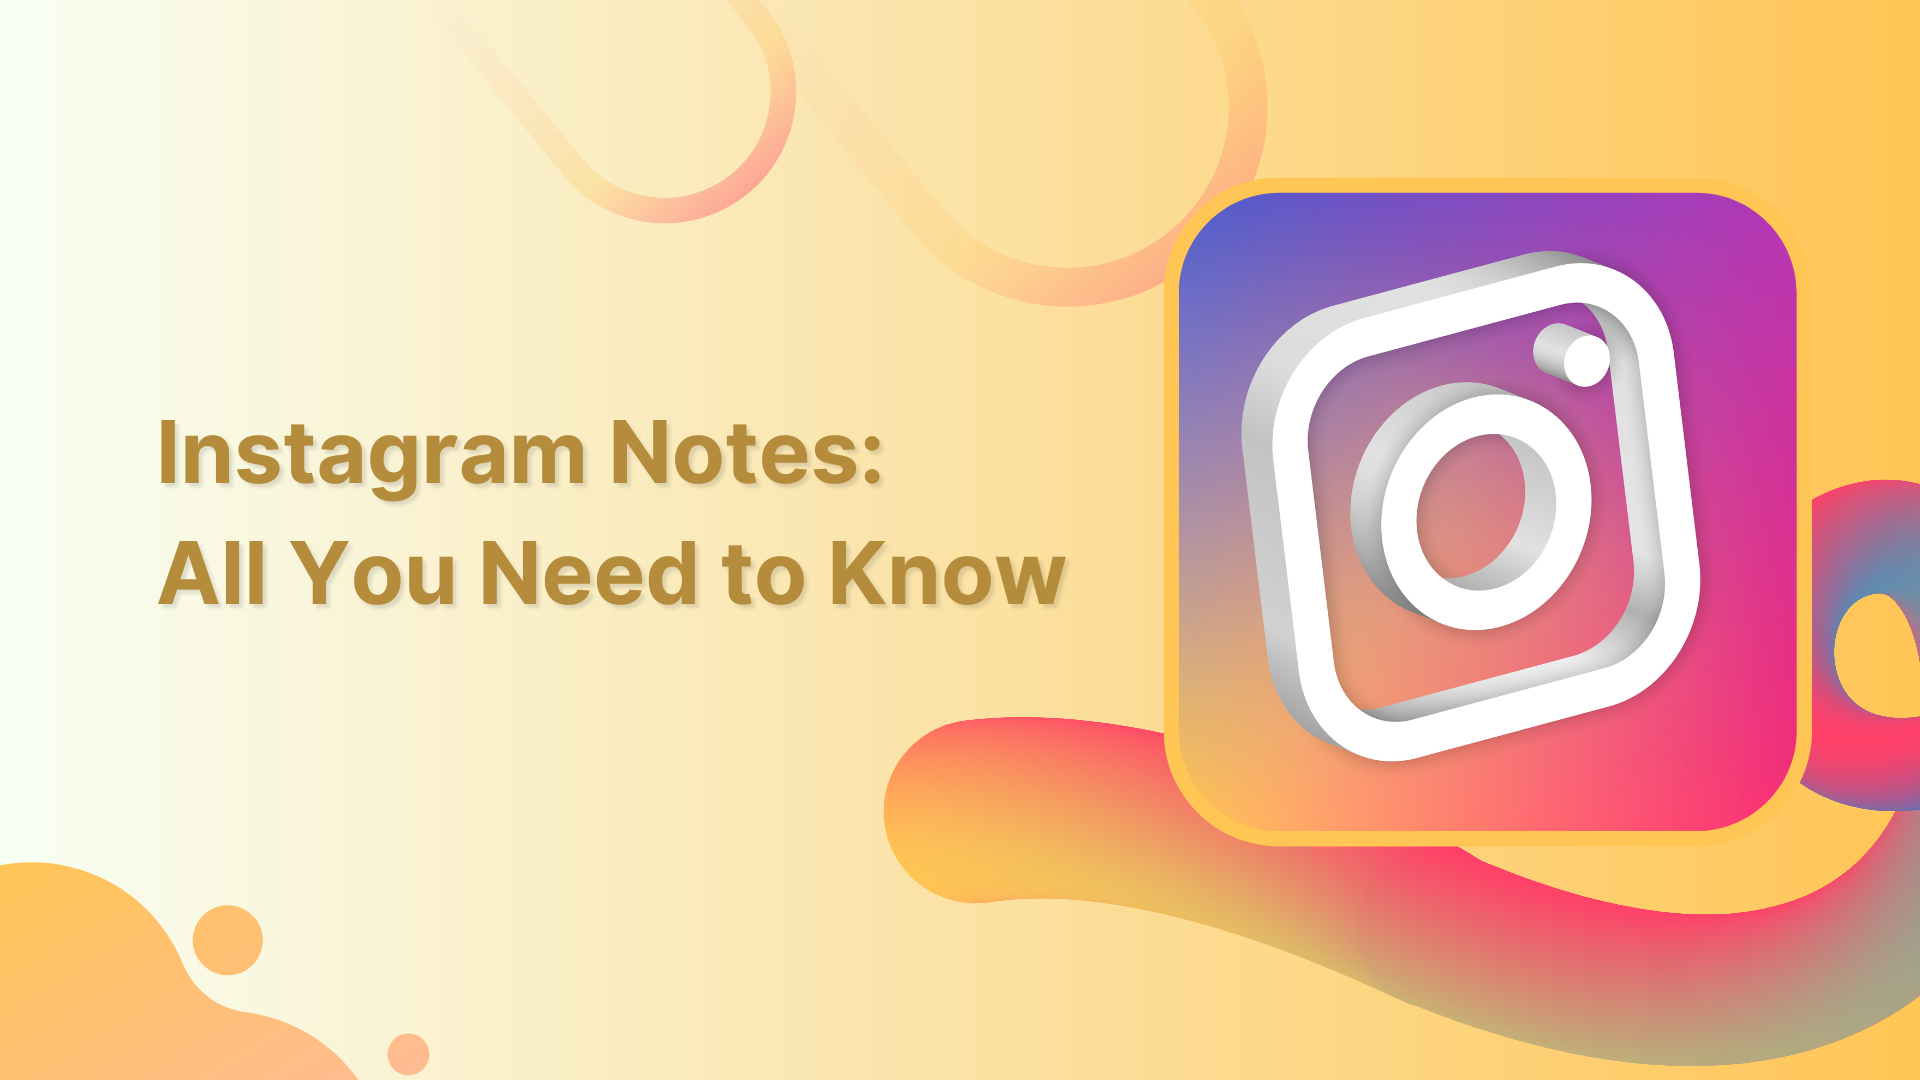 Instagram Notes: All You Need to Know